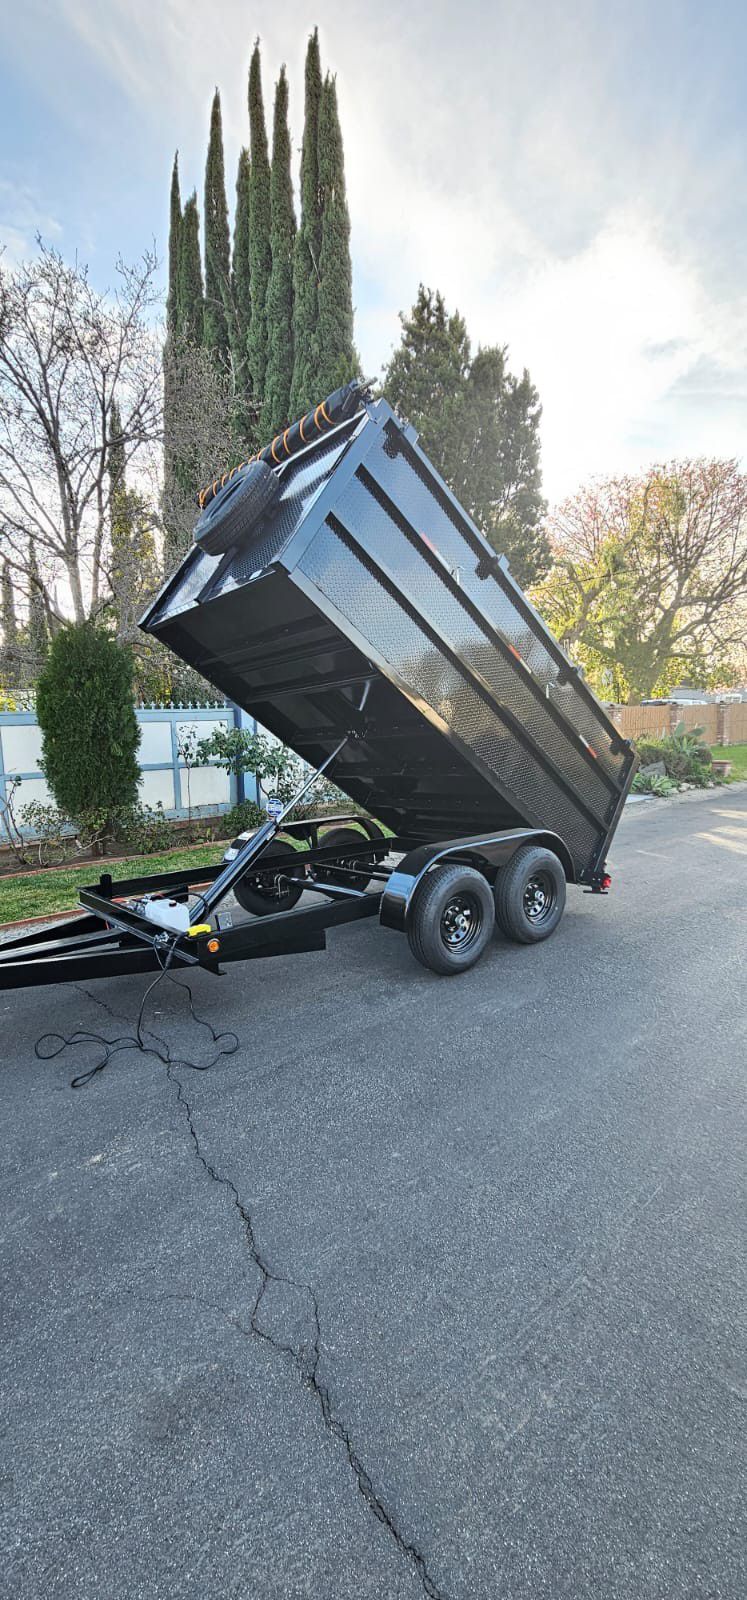 New DUMP TRAILER 12X8X4 HYDRAULIC SYSTEM, ROLLING TARP AND SPARE TIRE INCLUDING TITLE IN HAND READY FOR WORK FOR ANY QUESTION TEXT ME PLEASE HABLO ESP